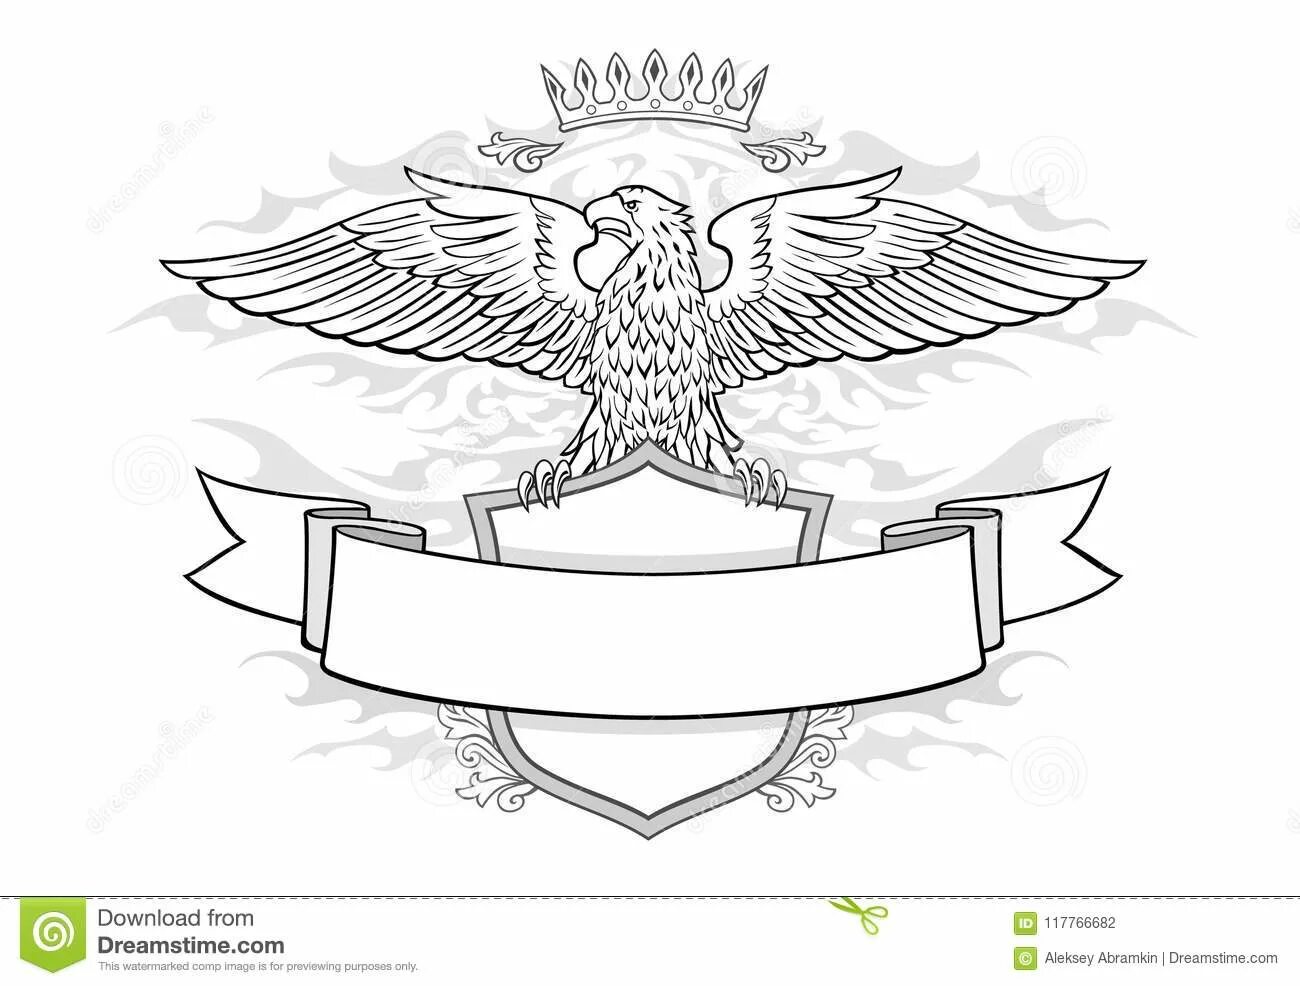 Coat of arms of the city of eagle #10